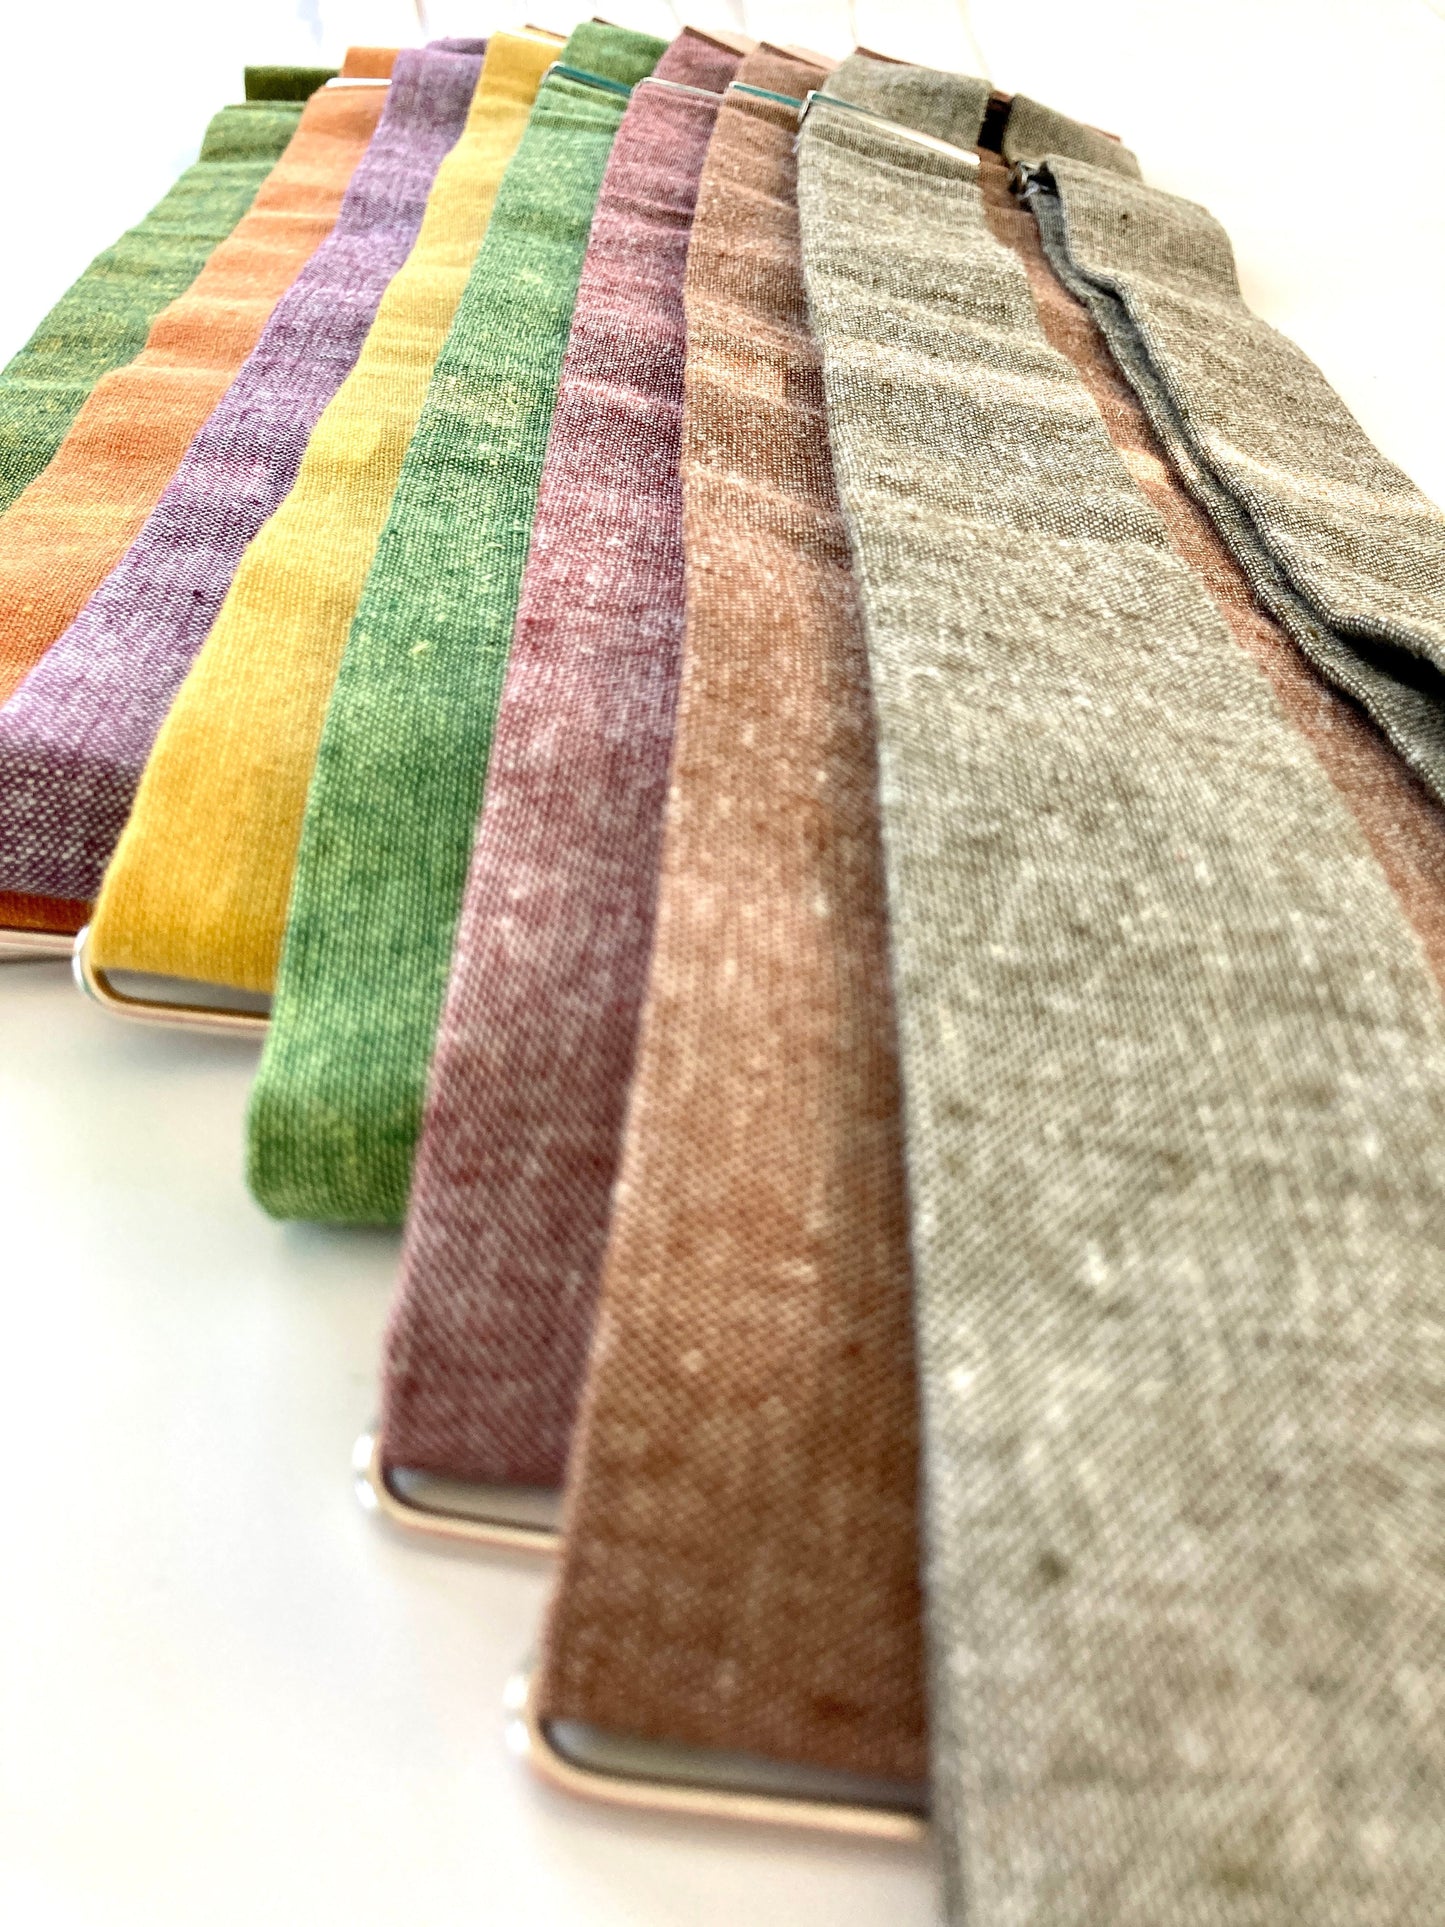 Stratton Suspender Co. Fall Linen Collection straps laid out in the following order: Palm (green and yellow woven linen), Orange, Purple, Yellow, Spruce (Bright Green), Rust or Maroon, Nutmeg (Brown), Olive Green